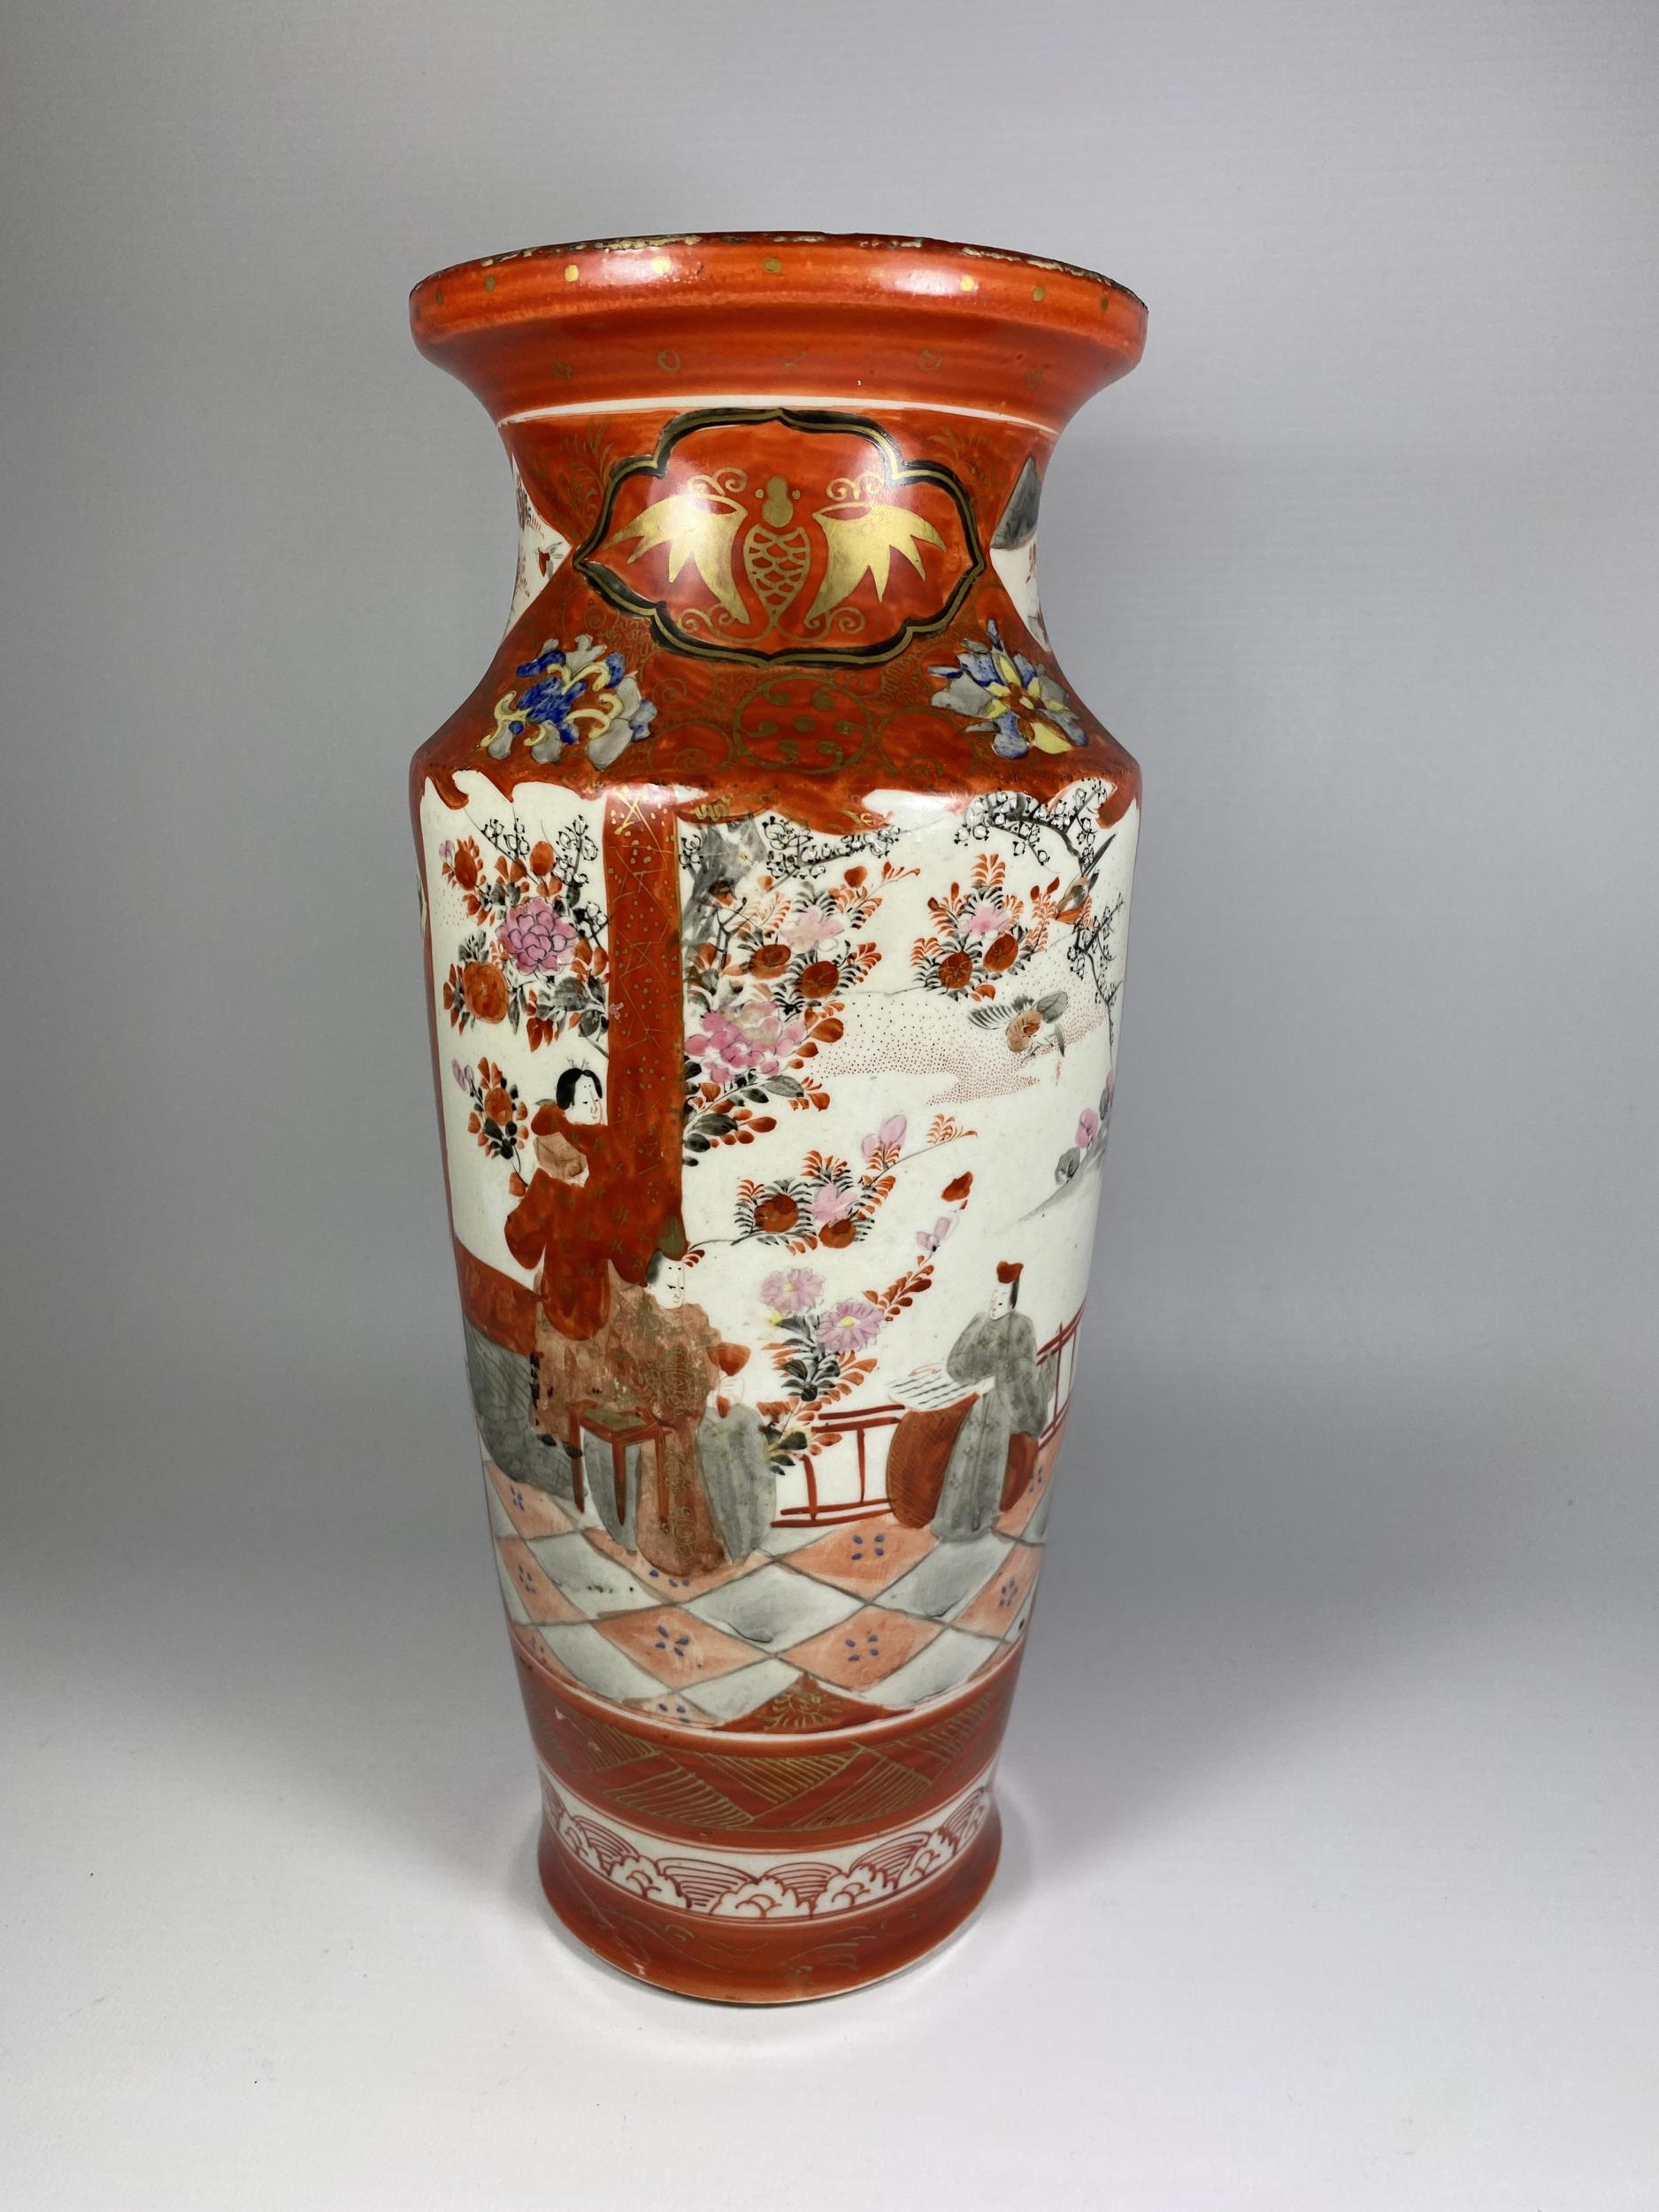 A LARGE JAPANESE KUTANI WARE VASE WITH TEMPLE FIGURAL TEMPLE DESIGN, CHARACTER MARKS TO BASE, HEIGHT